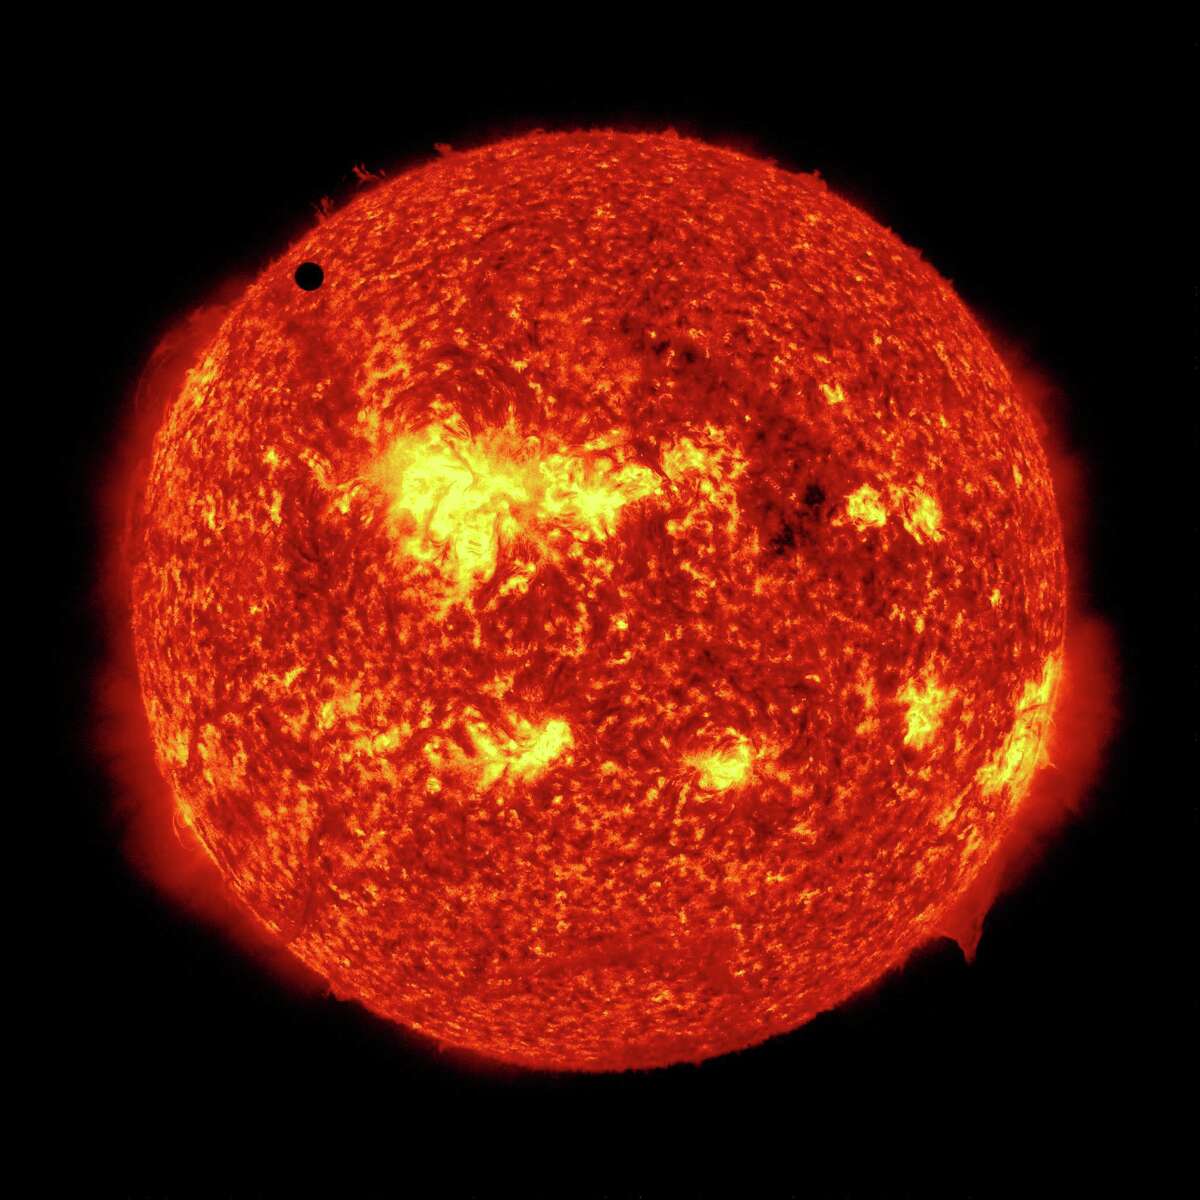 In this handout image provided by NASA, the SDO satellite captures a ultra-high definition image of the Transit of Venus across the face of the sun at on June 5, 2012 from space. The last transit was in 2004 and the next pair of events will not happen again until the year 2117 and 2125.